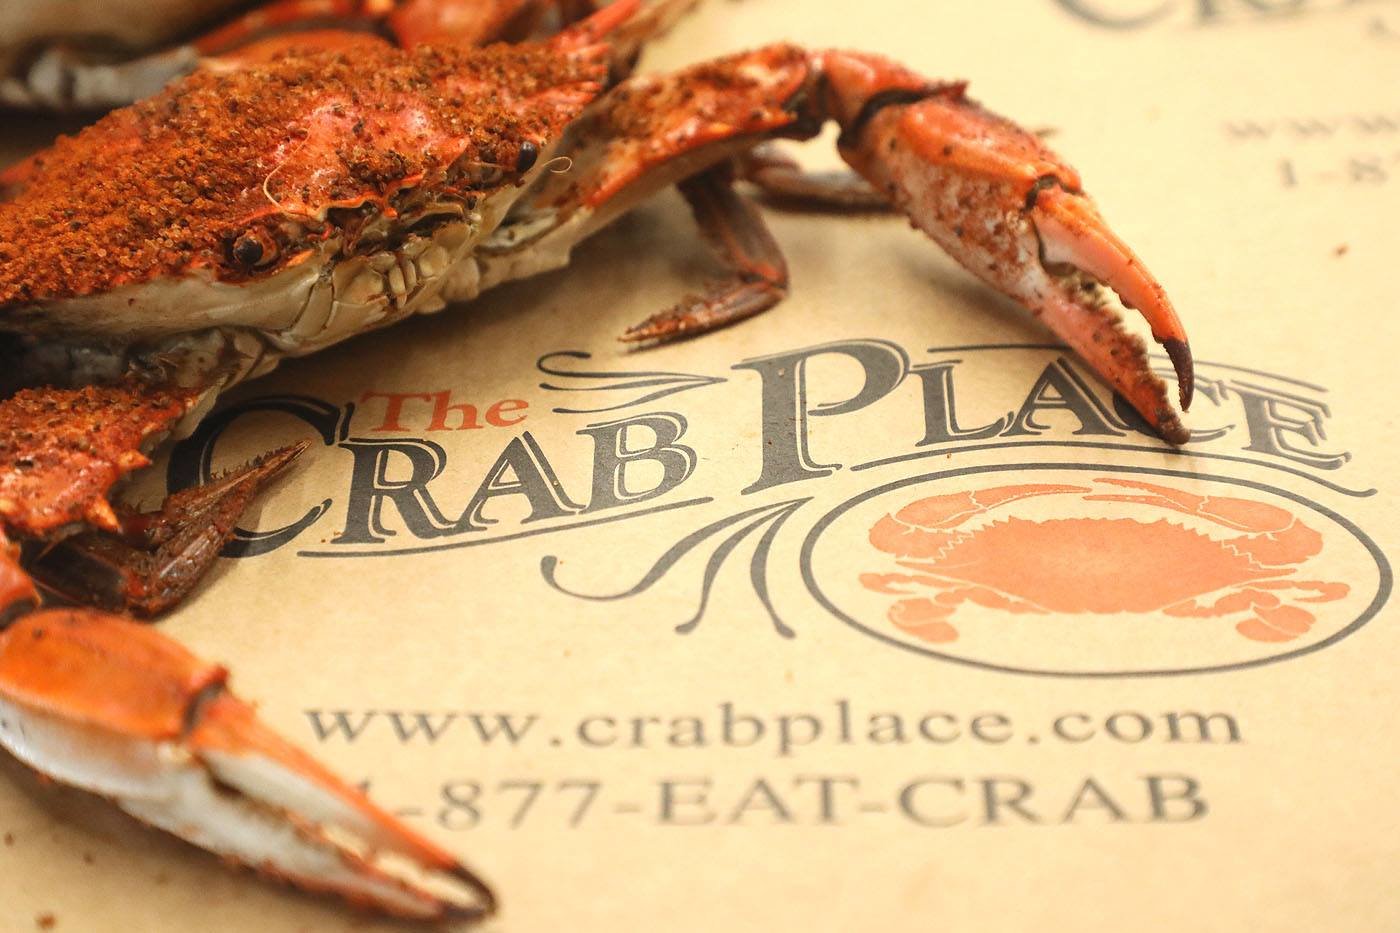 Experience Crisfield with a Crab & Cruise Shorebread